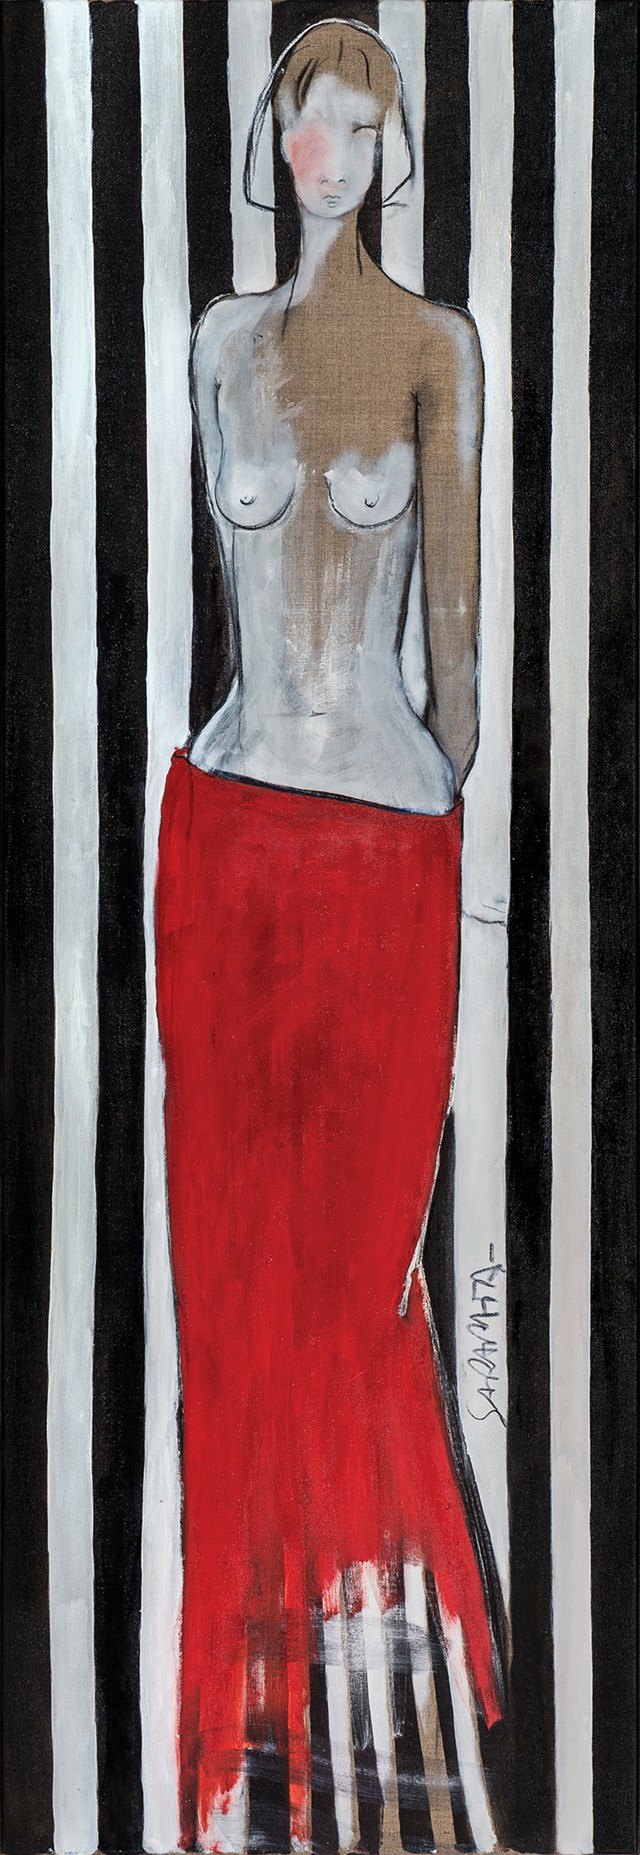 Living room painting by Joanna Sarapata titled Act in red skirt